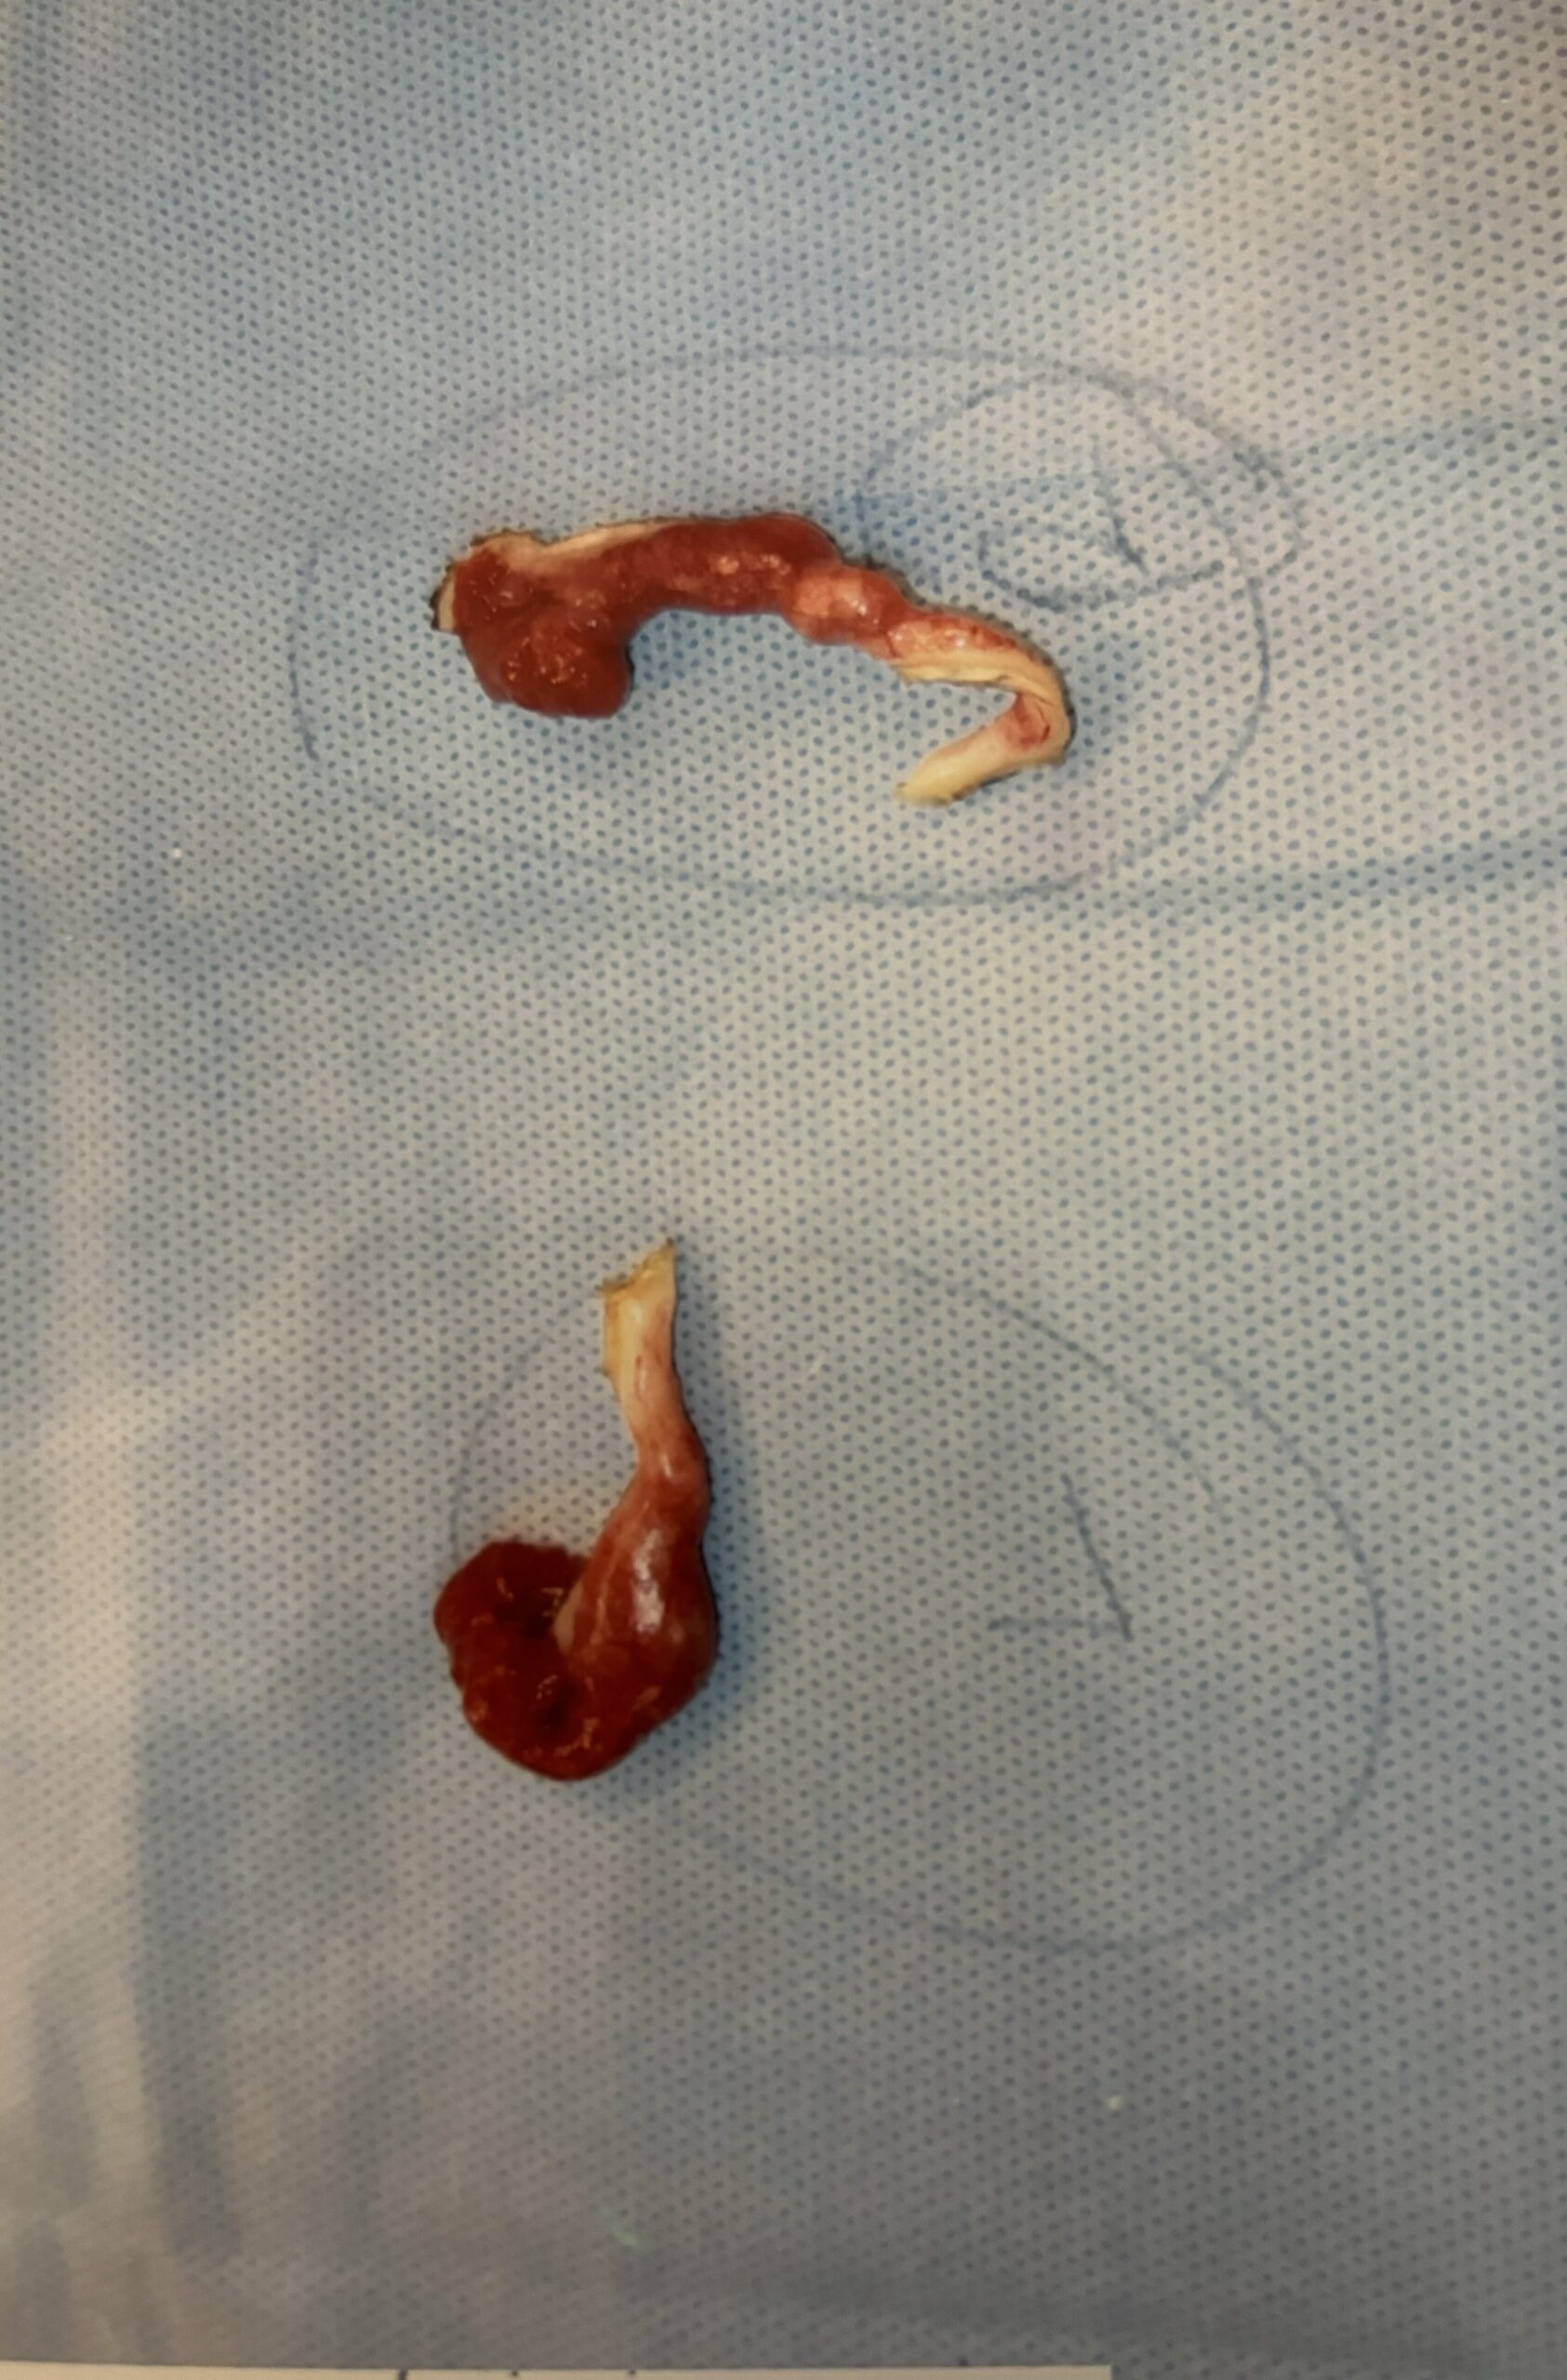 Fallopian tubes removed during hysterectomy.